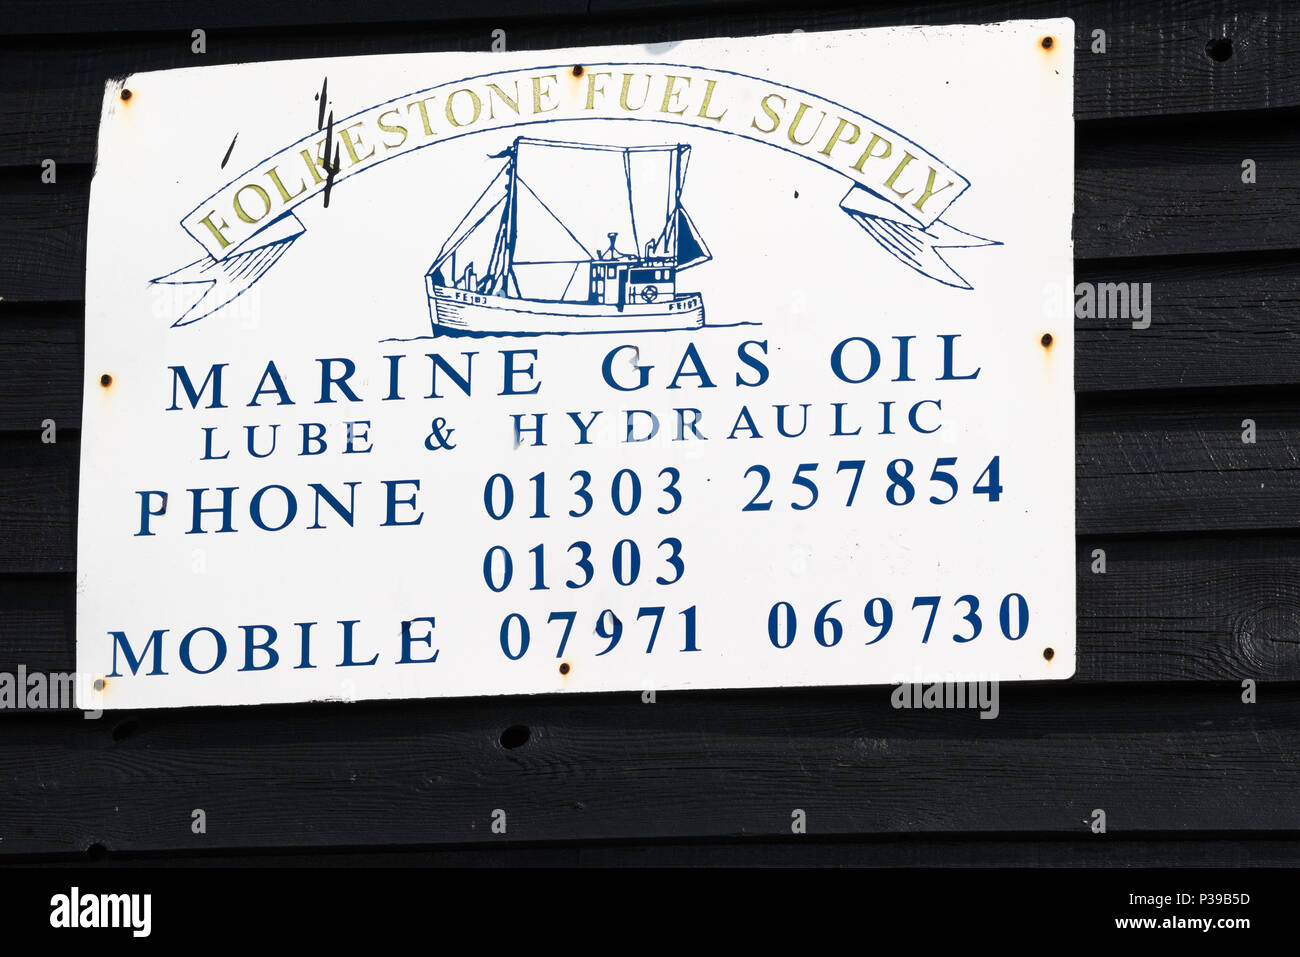 Signboard for the Folkestone Fuel Supply company at Folkestone harbour, Kent, England, UK Stock Photo